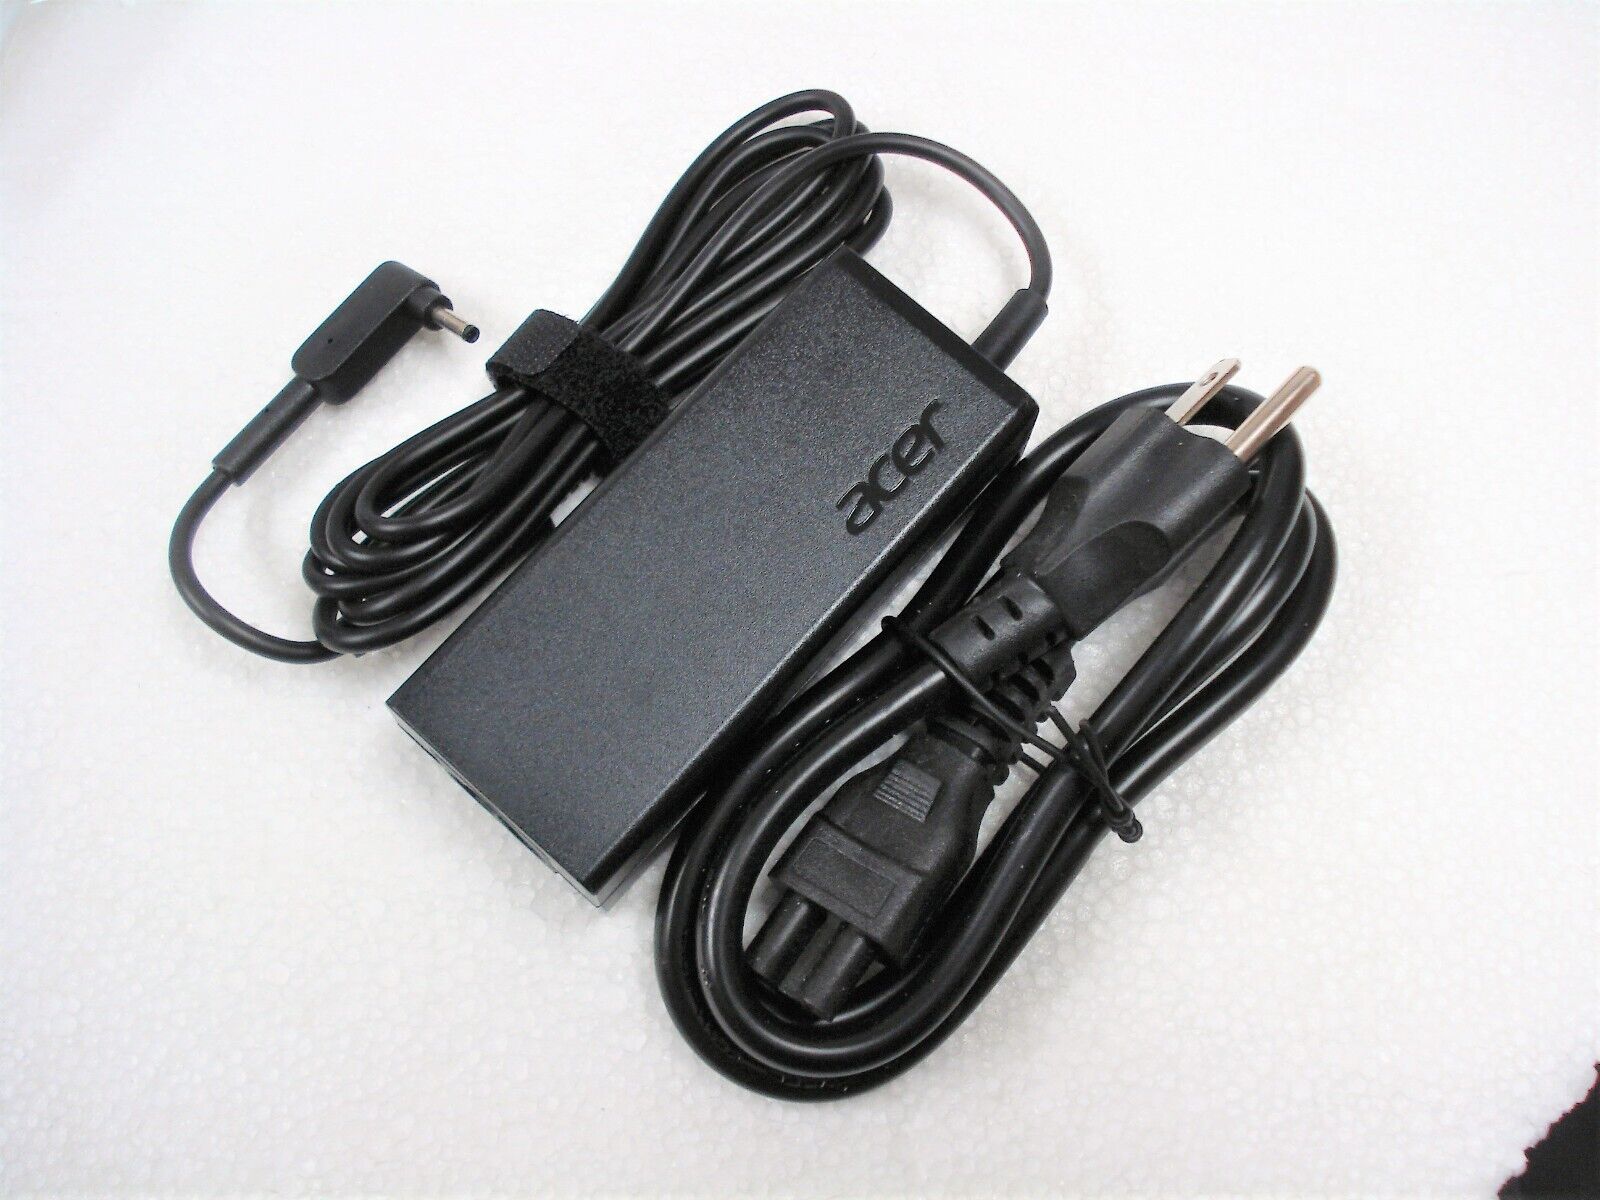 New OEM Original Acer 45W 19V 2.37A AC Adapter Charger PA-1450-26 A13-045N2A 3mm